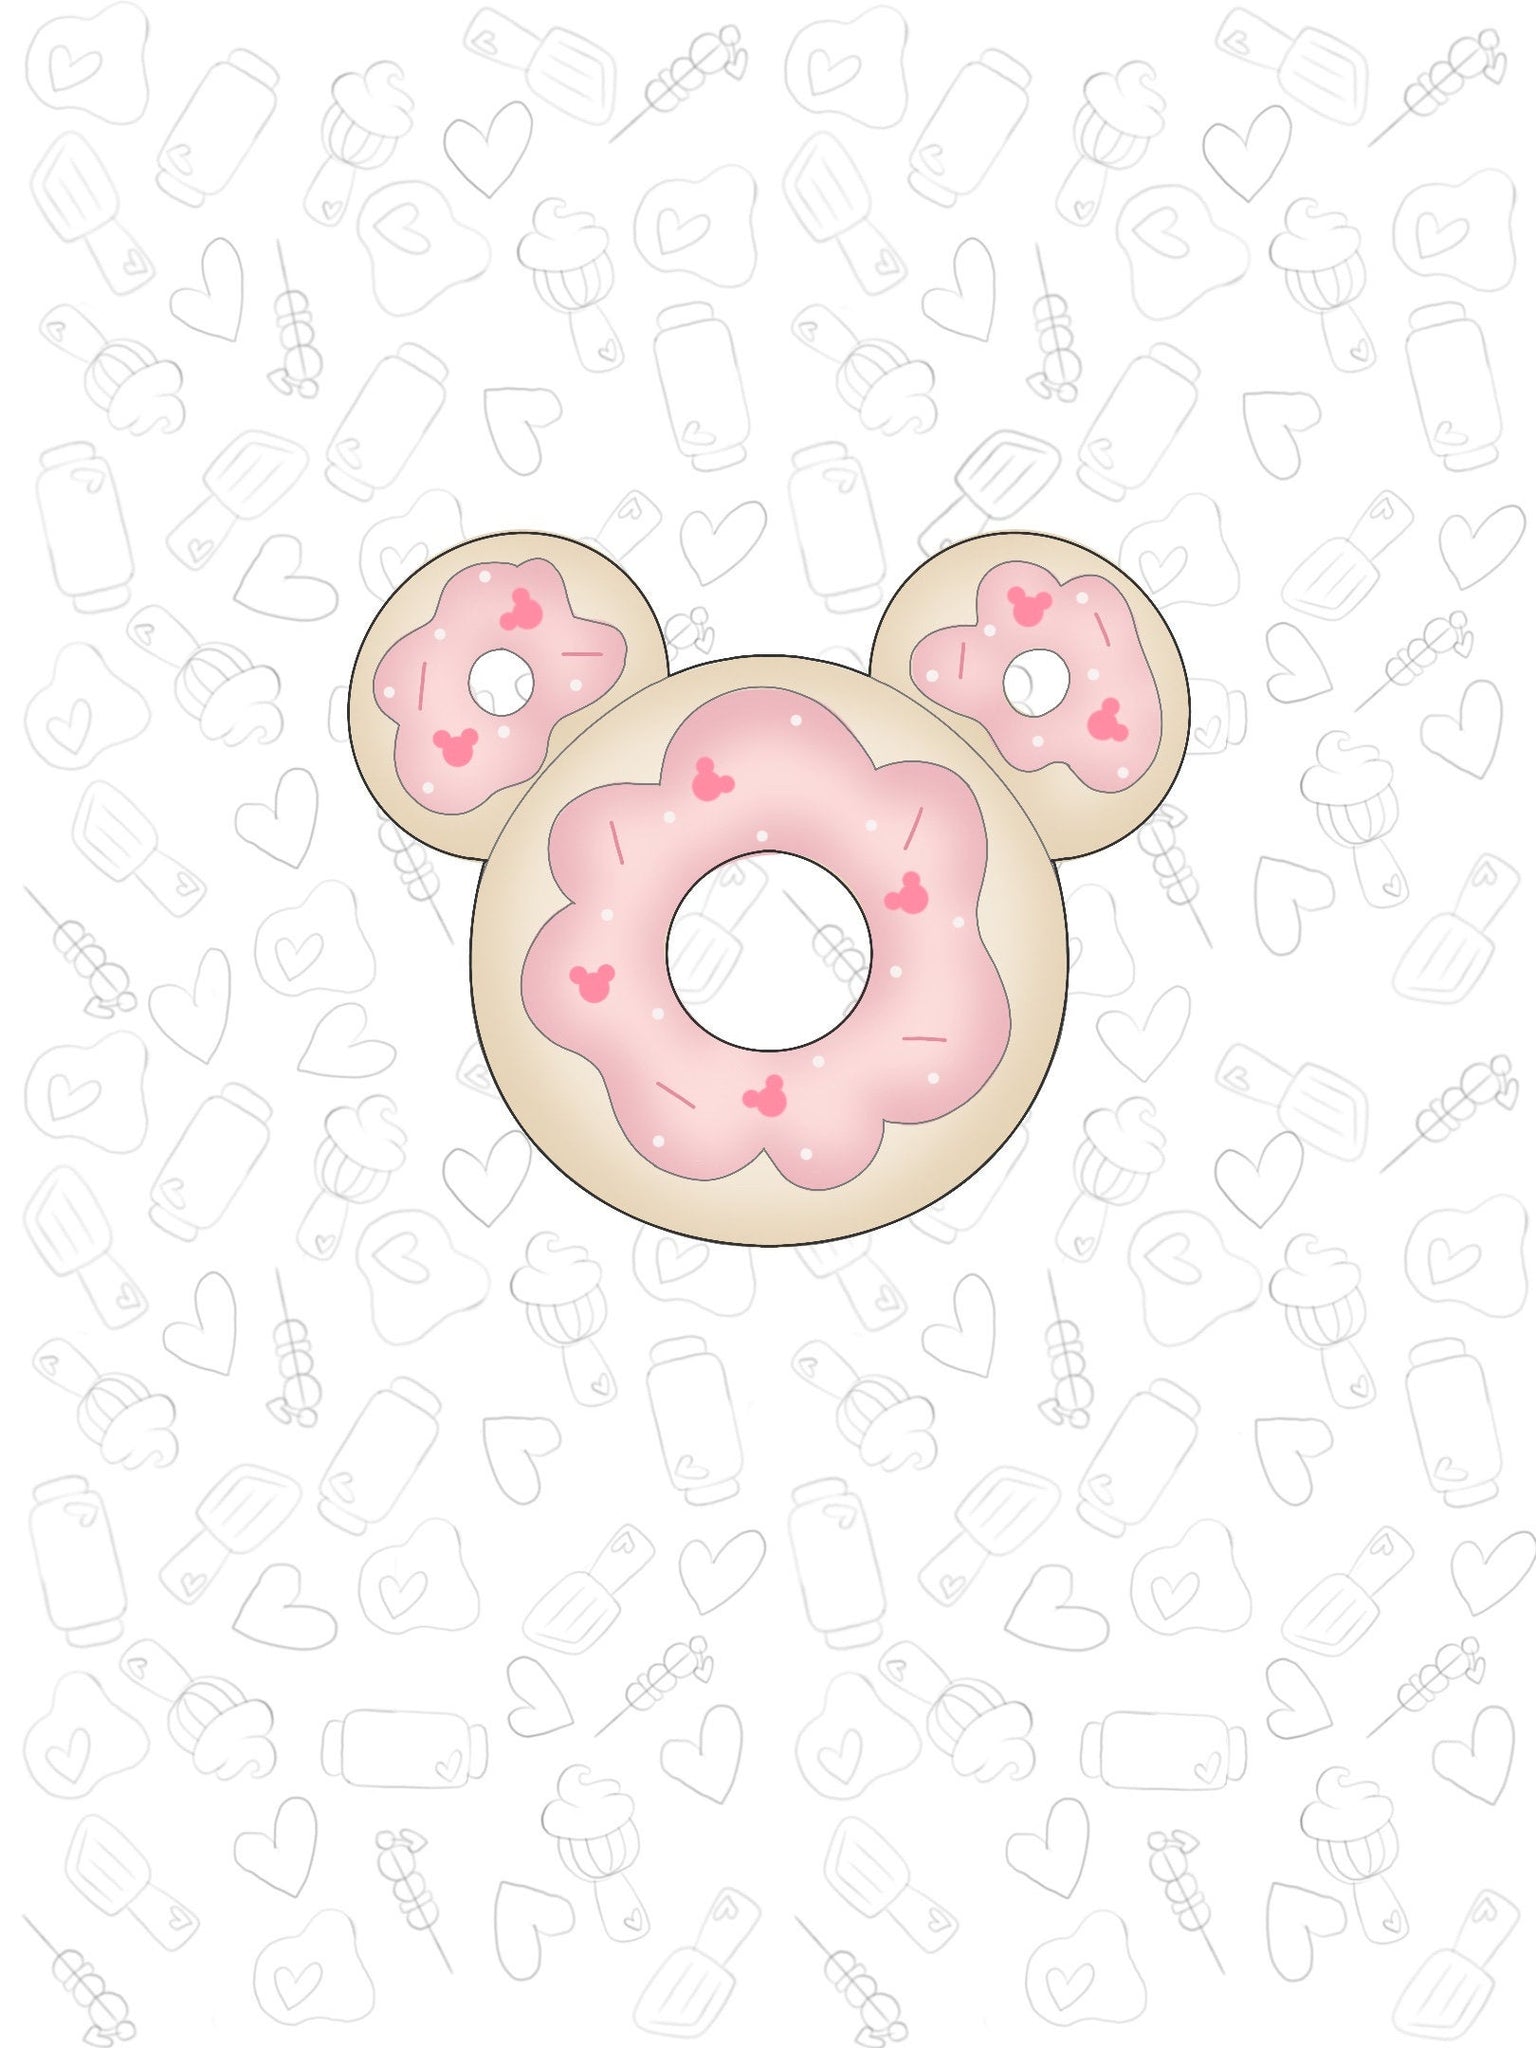 Mouse Donut